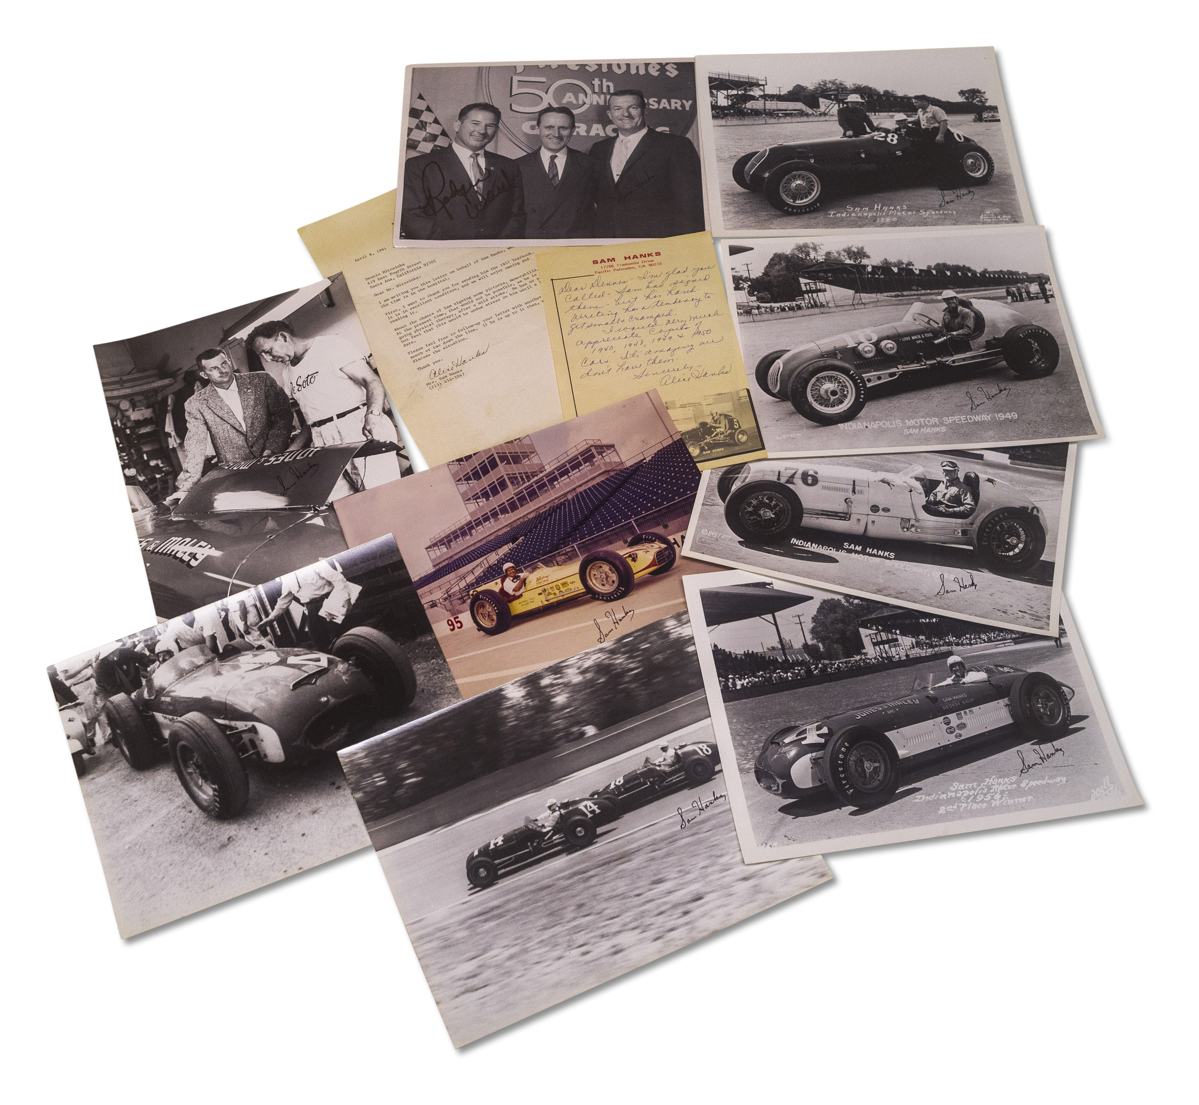 Indianapolis Racing Photographs Signed by Sam Hanks offered at RM Sotheby's The Mitosinka Collection online auction 2020